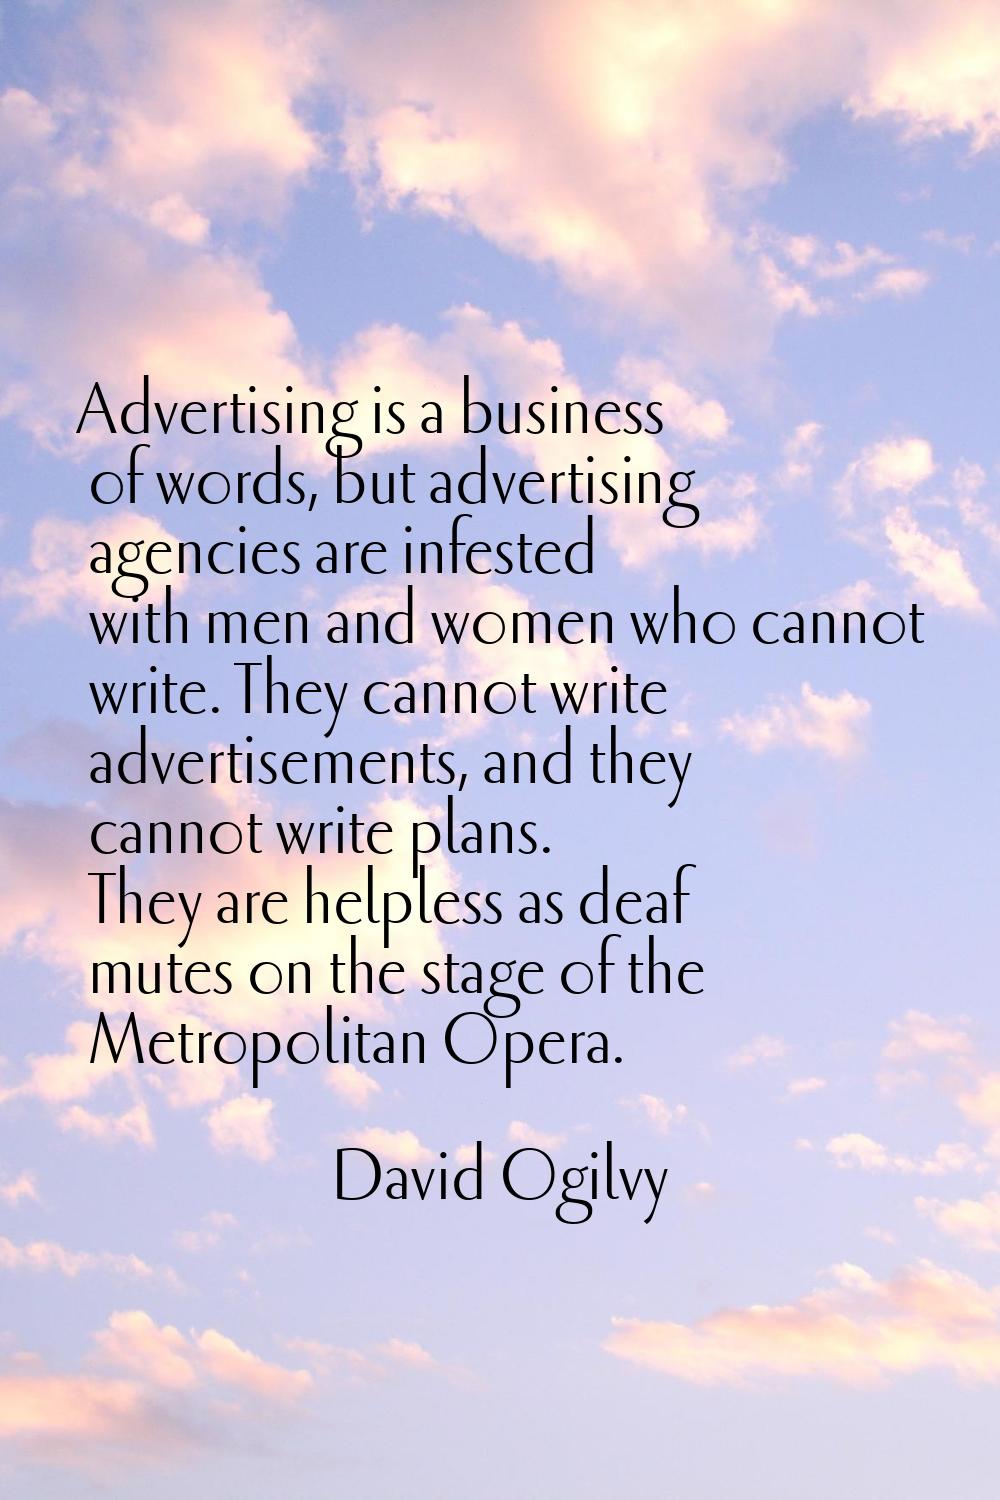 Advertising is a business of words, but advertising agencies are infested with men and women who ca